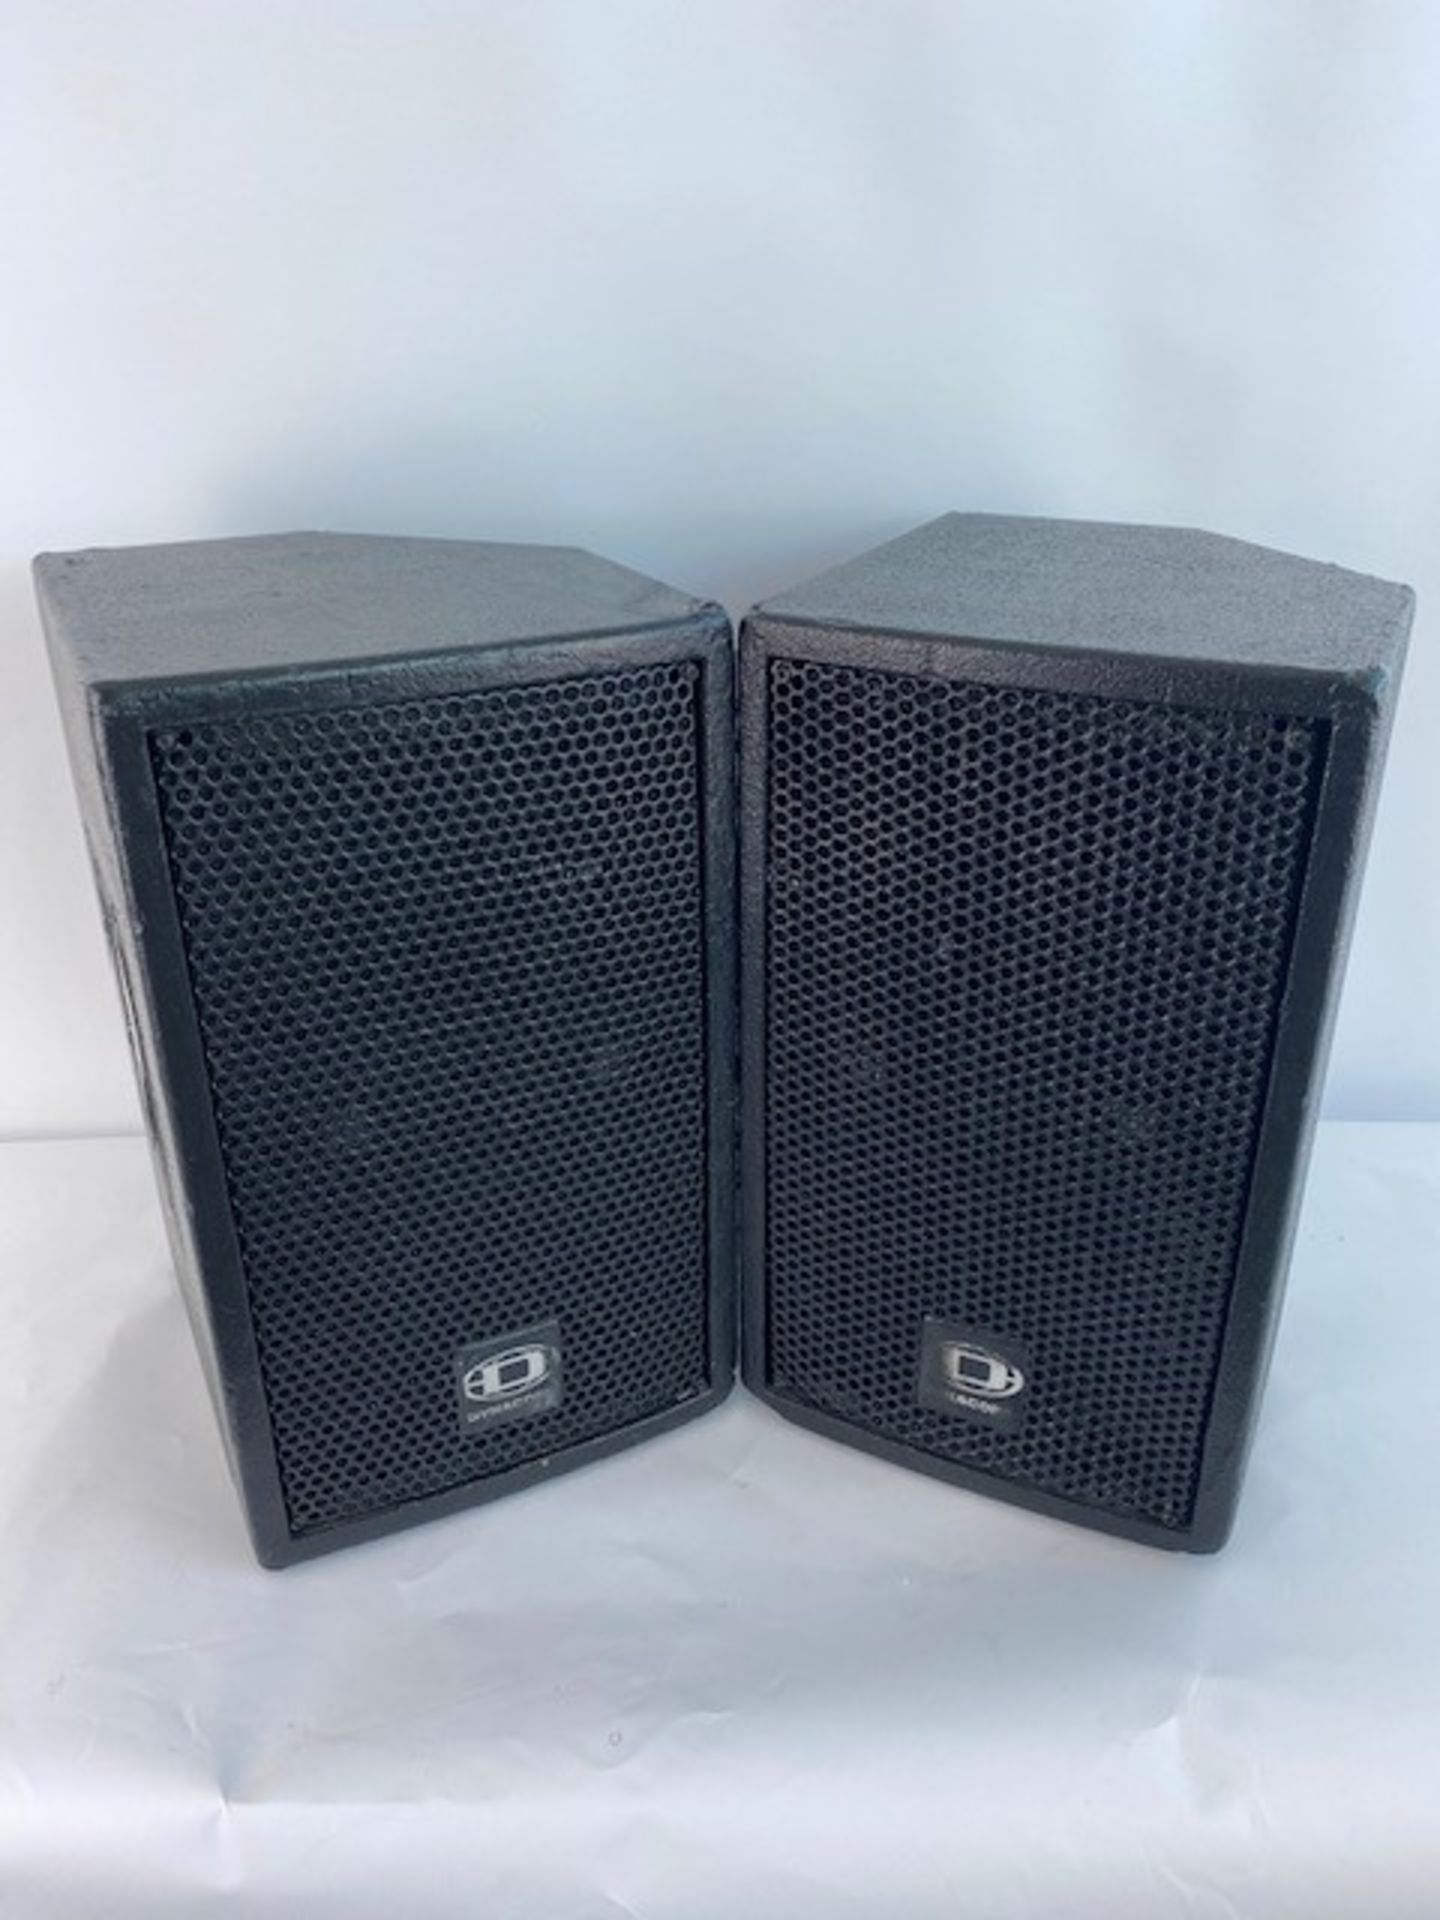 2 x Dynacord LM8-2 300w 8ohms Passive Speakers (pair of) In Individual Gator Carry Bags - Ref: 122 -